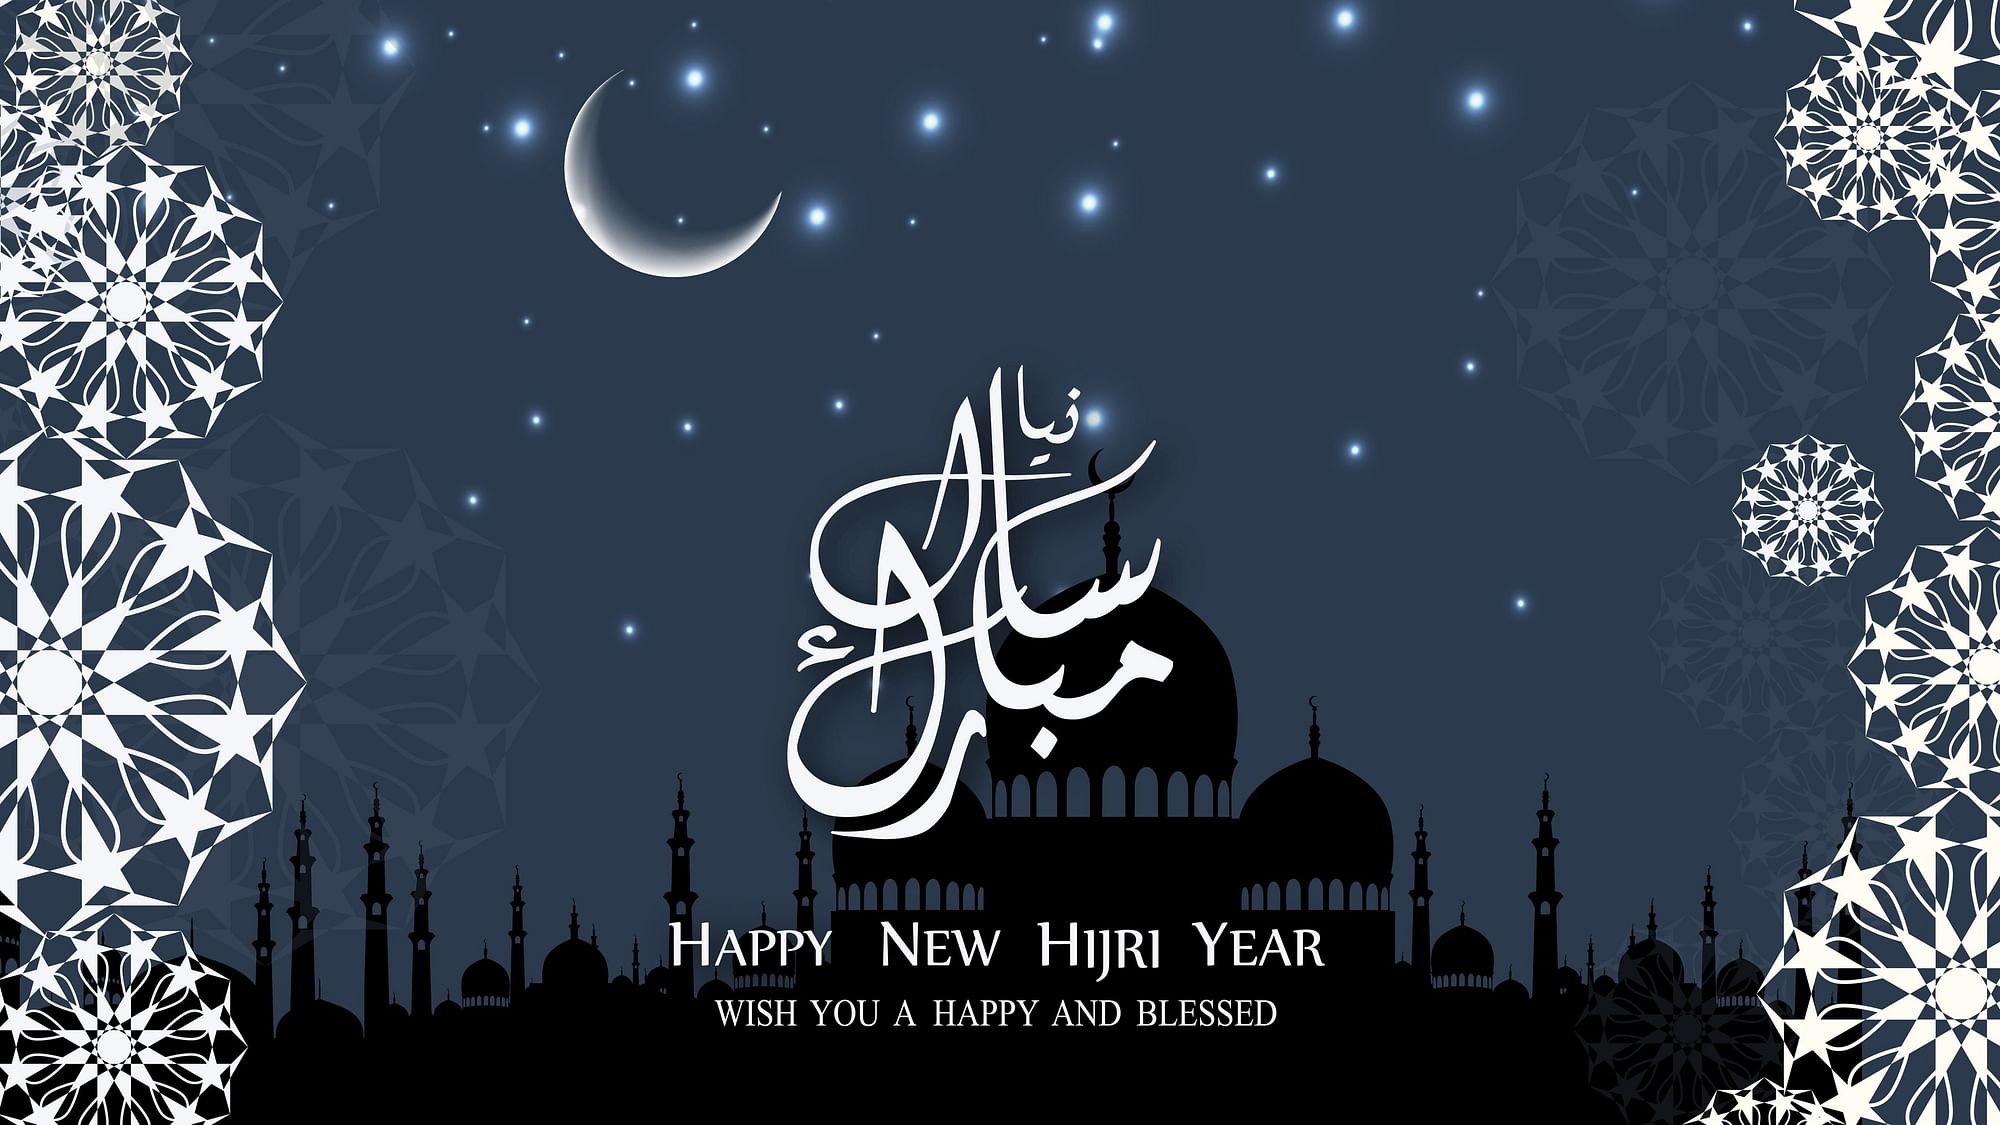  Happy Hijri Islamic New Year 1442 Greeting and Images with Quotes